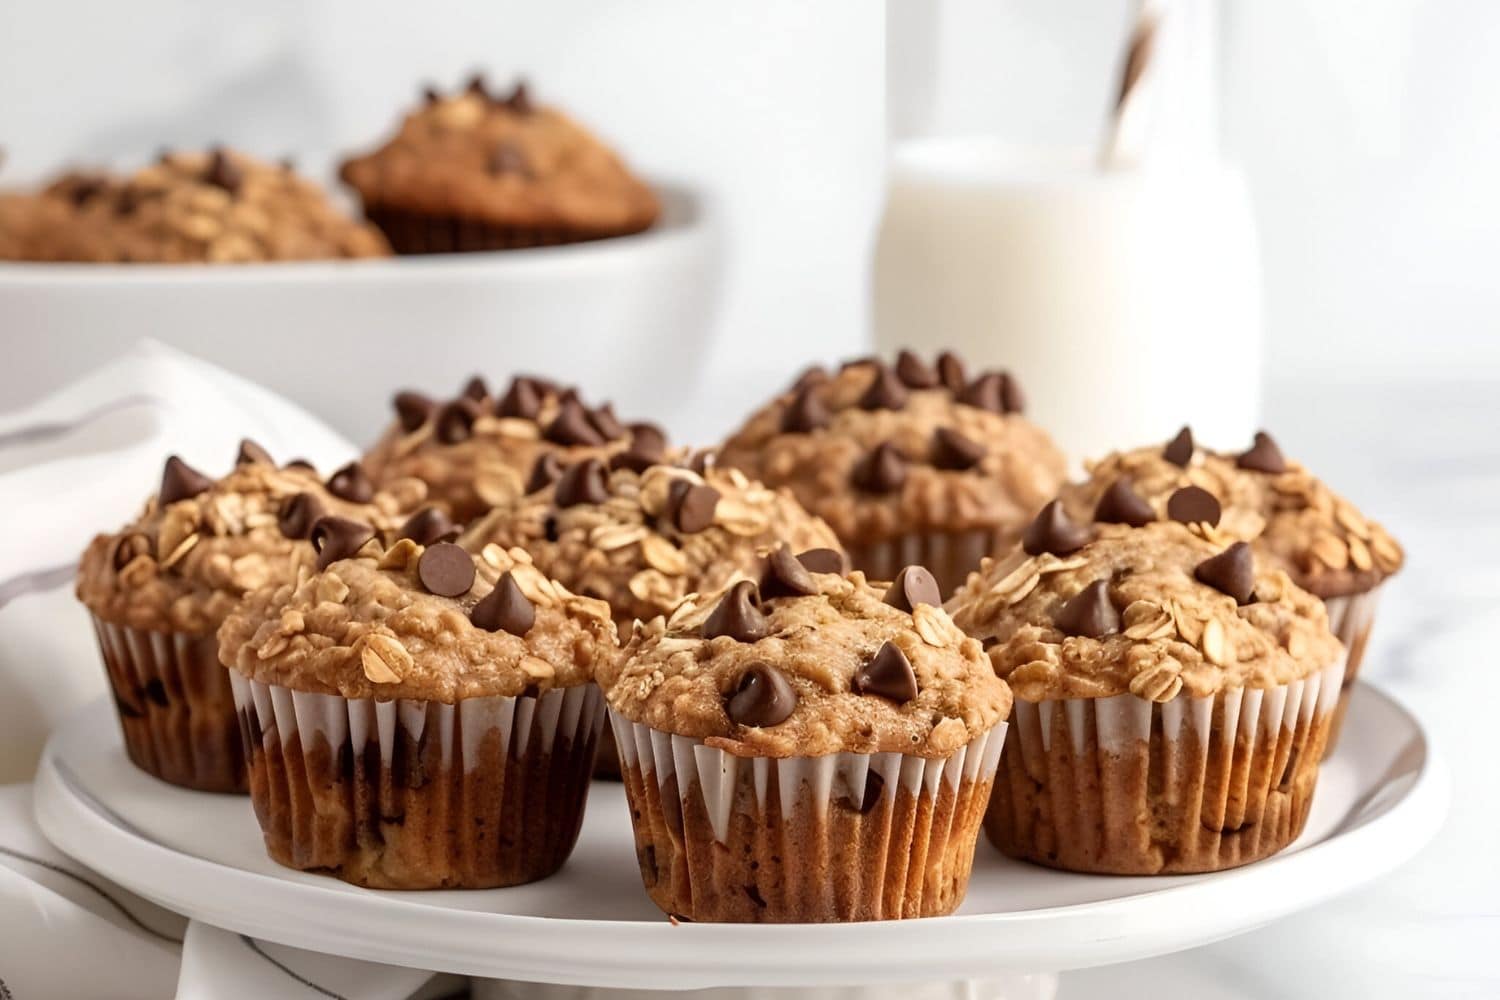 Chocolate Chip Oatmeal Muffins on a White Cake Tray with a Glass of Milk